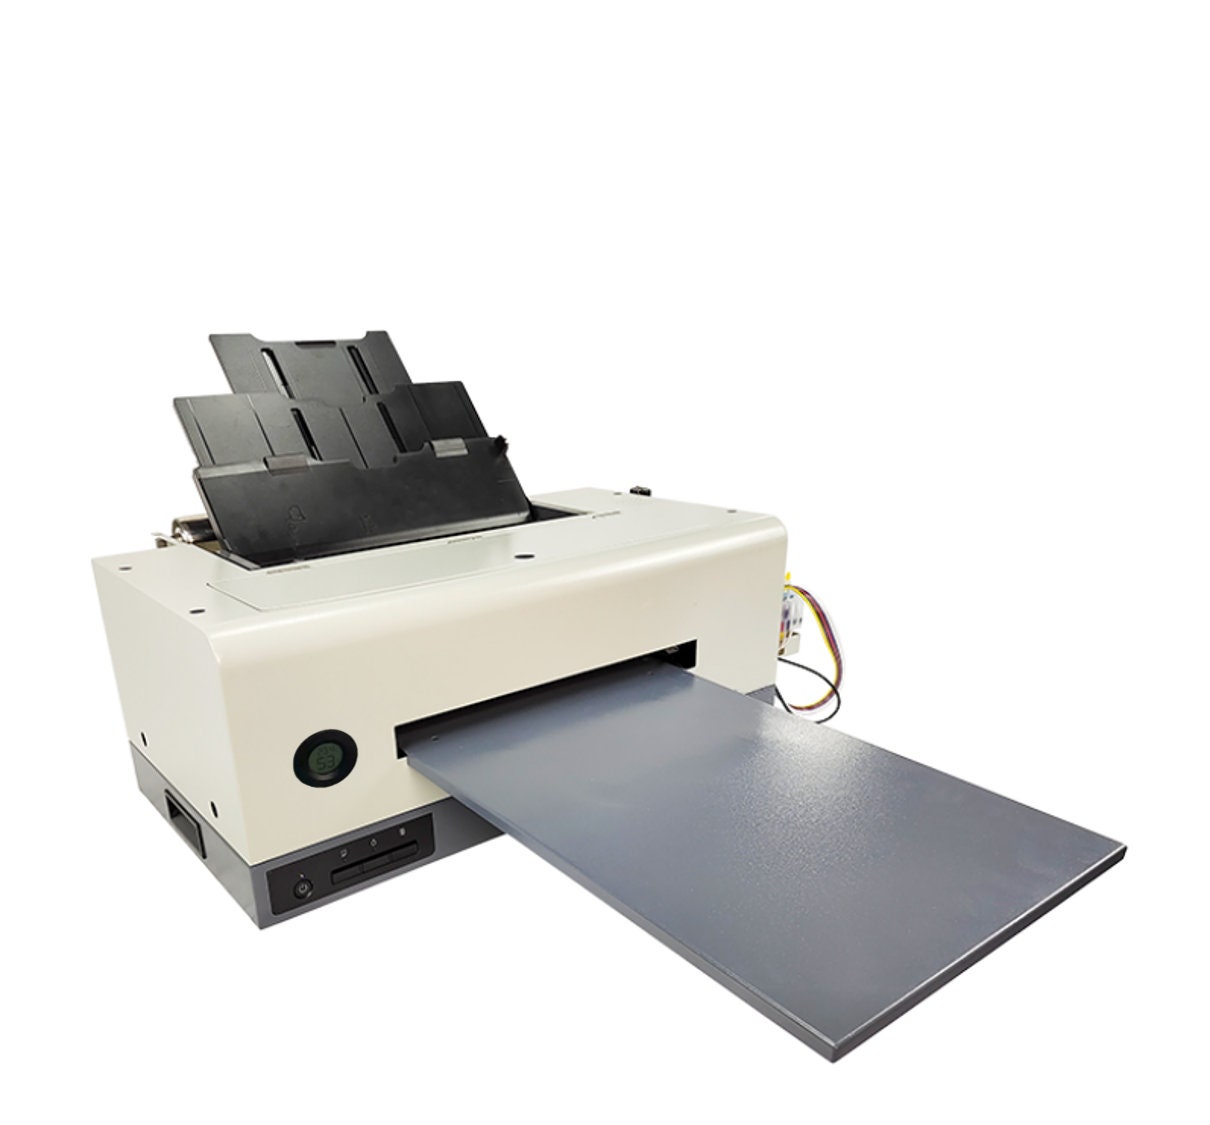 A4 Heat Press Machine for Sublimation Printing Cases Covers at Rs